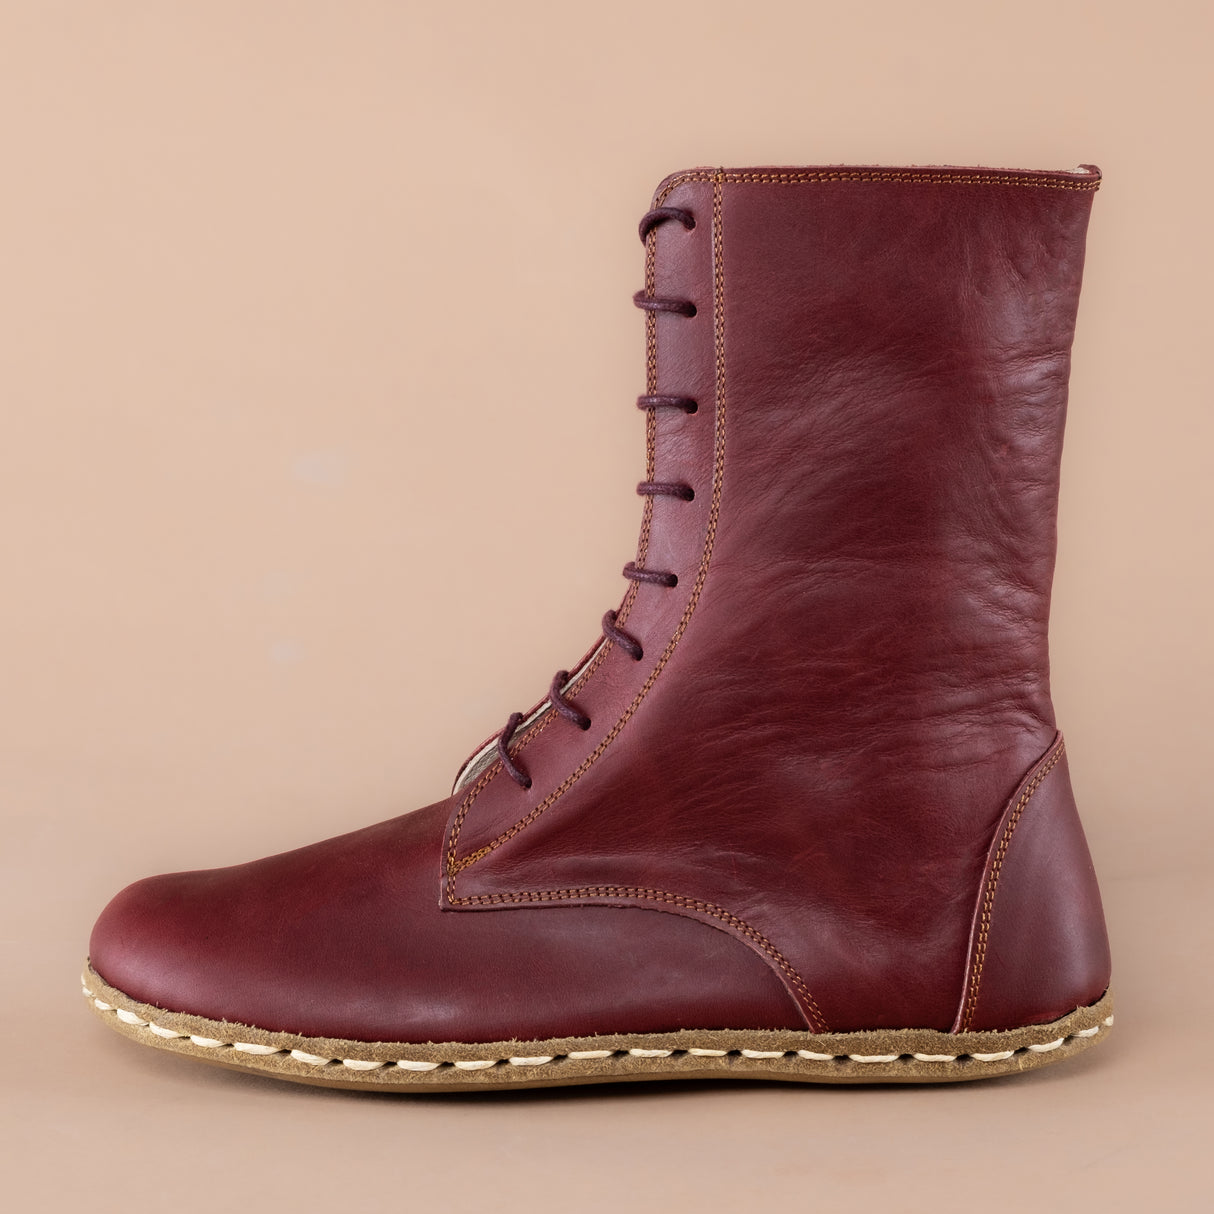 Men's Burgundy Barefoot High Ankle Boots